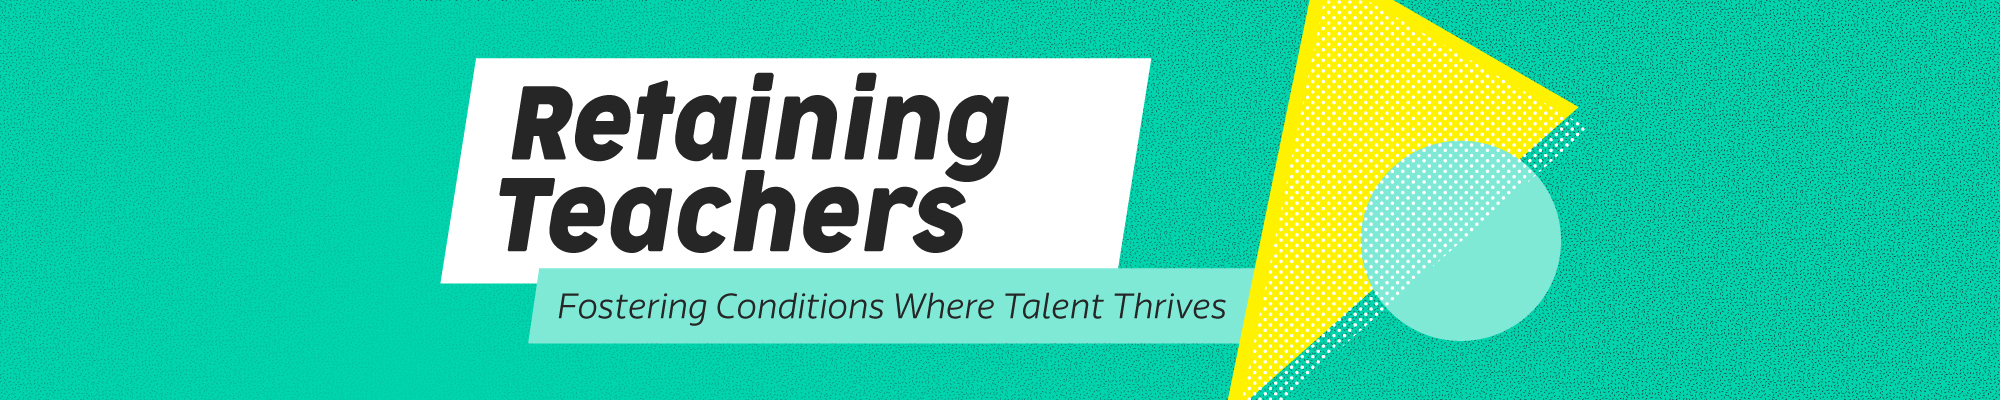 Retaining Teachers: Fostering Conditions Where Talent Thrives